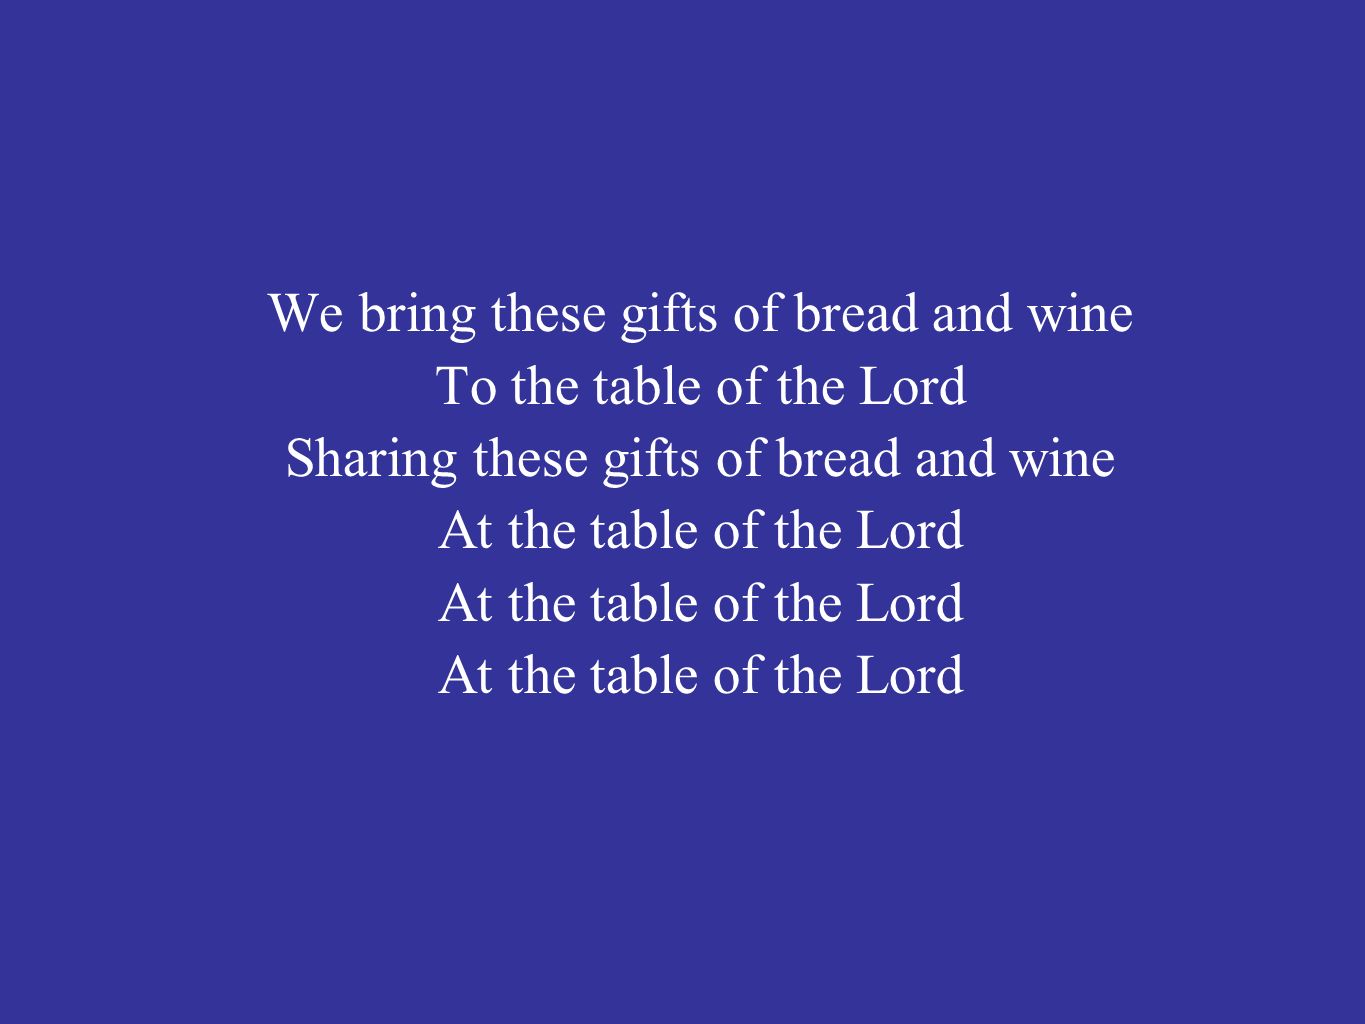 We bring these gifts of bread and wine To the table of the Lord Sharing these gifts of bread and wine At the table of the Lord